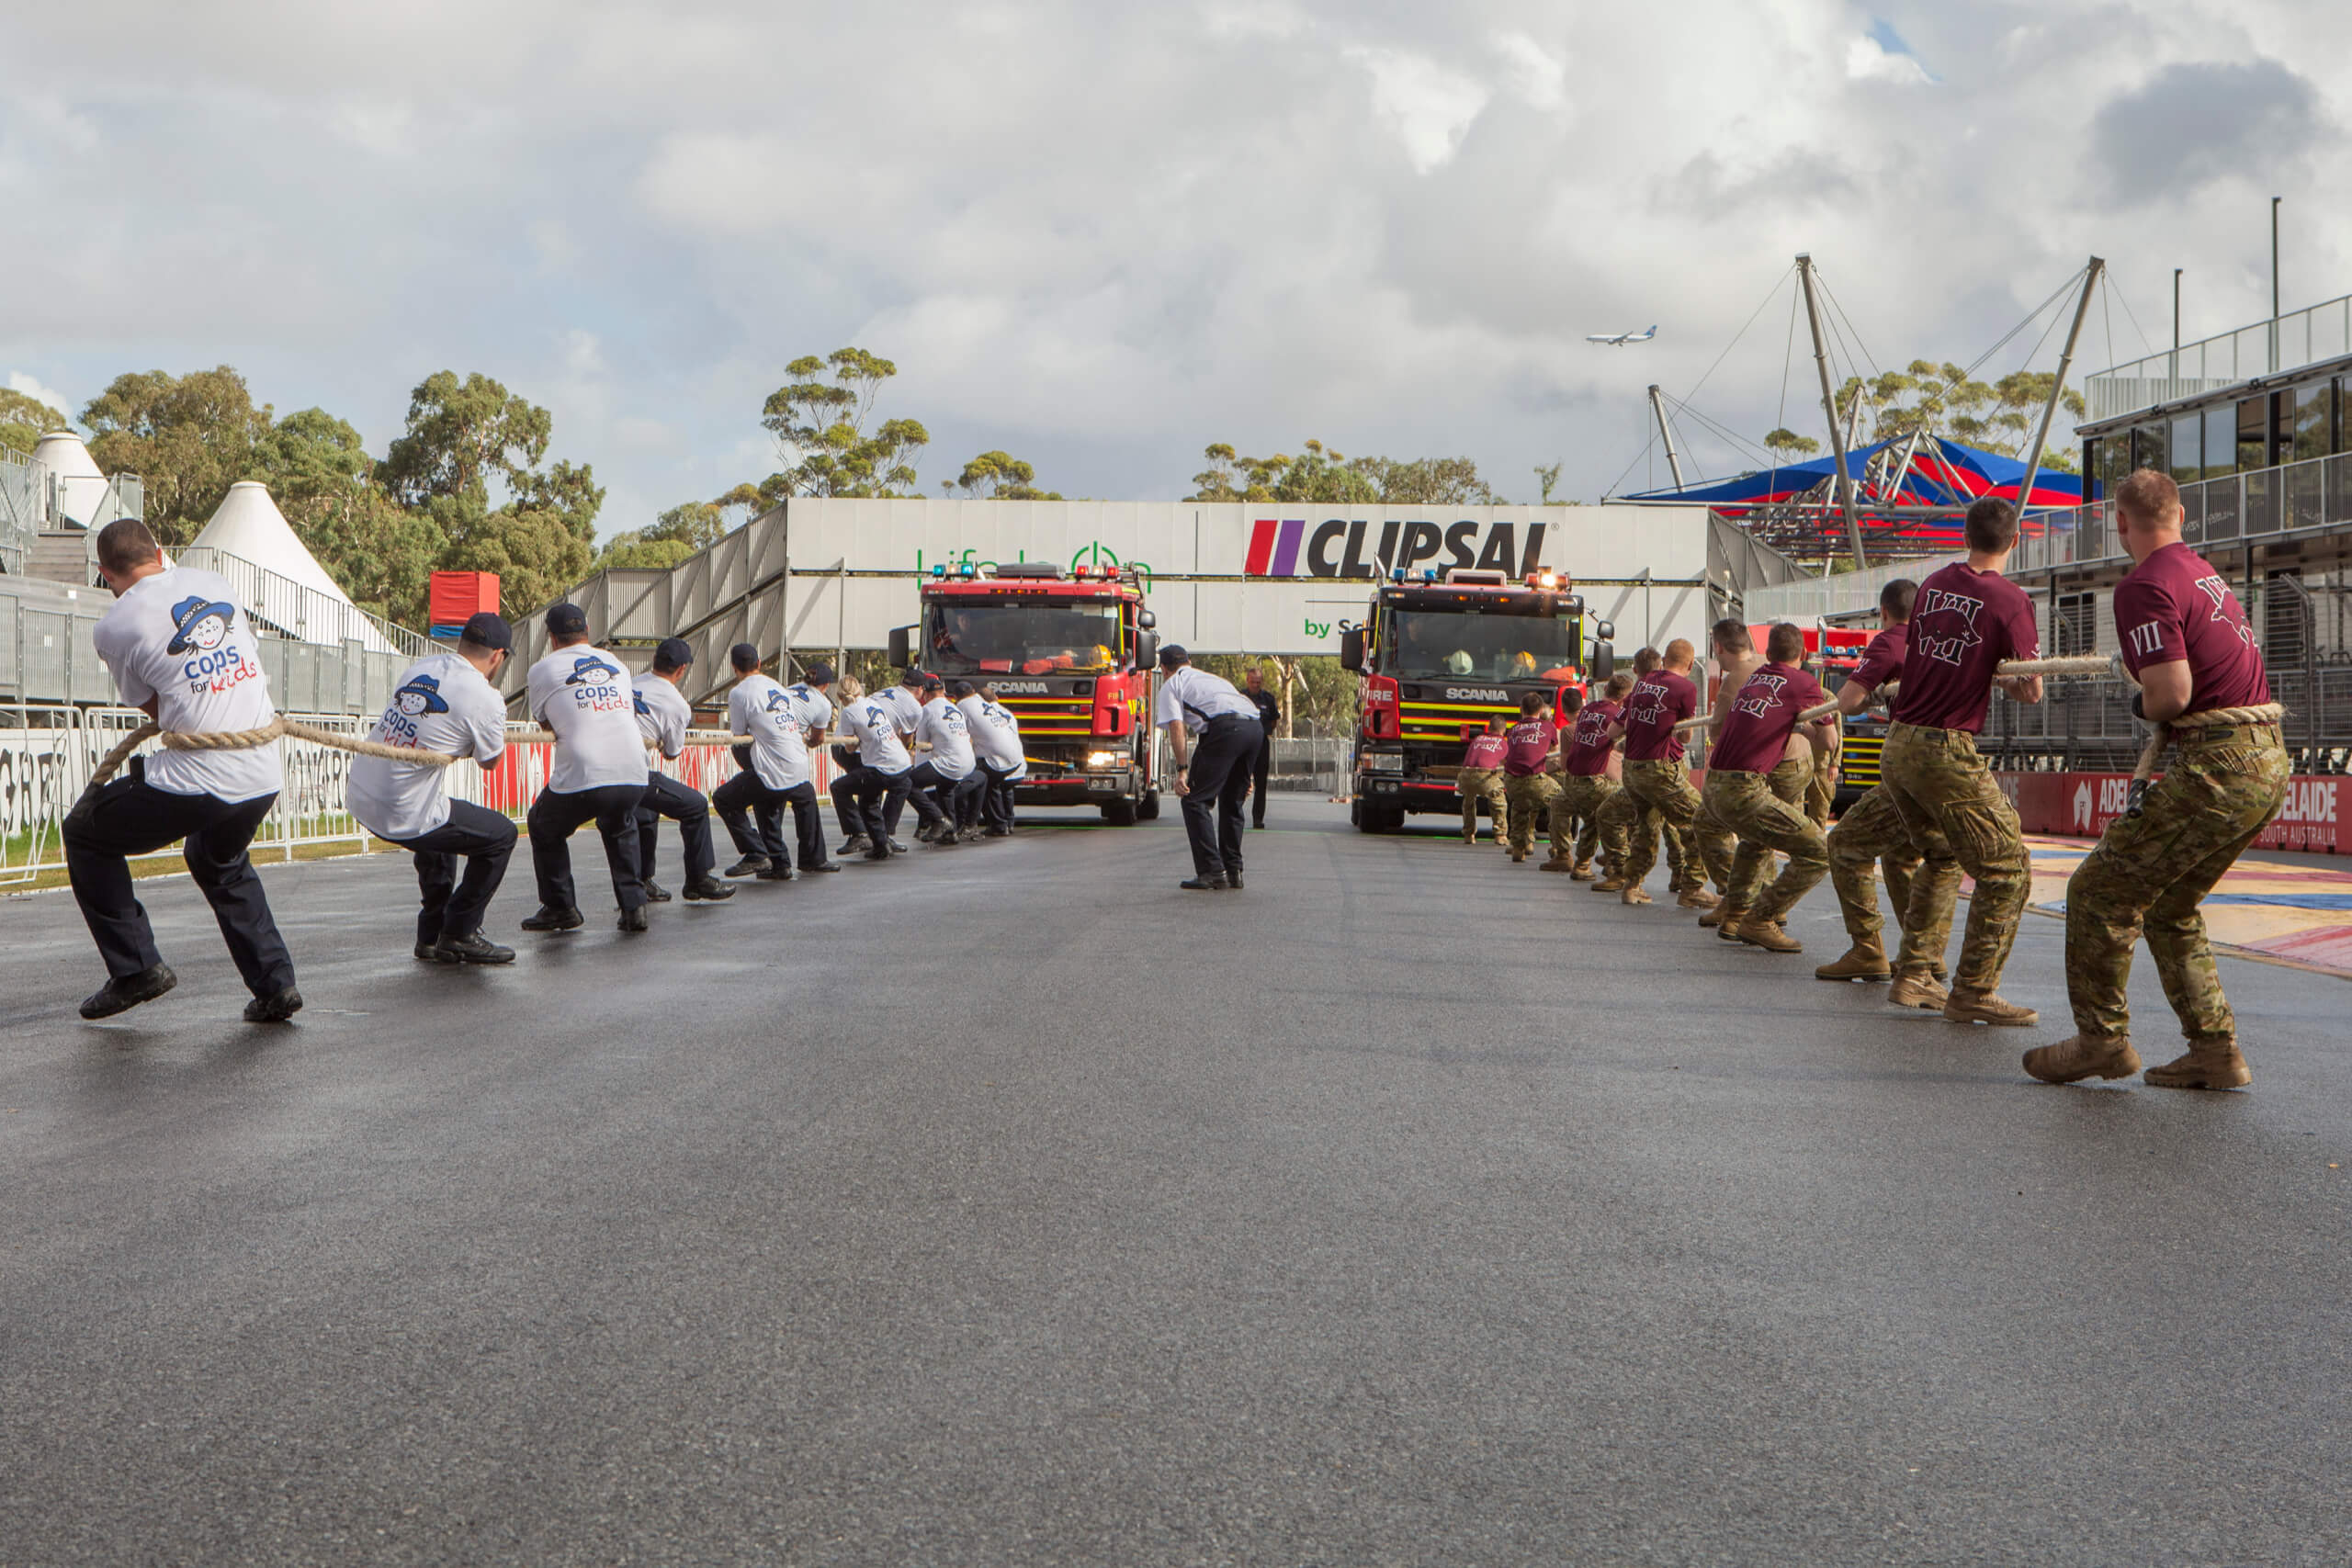 The South Australian Police "Cops for Kids" team (left) races against the Australian Army 7th Battalion, Royal Australian Regiment team in a competition to pull a fully loaded fire truck 75 metres first across the Clipsal 500 race track finish line, to help raise charity funds for the Team Kids Easter Appeal 2017 Fire Engine Pull. *** Local Caption *** The TeamKids Easter Appeal is a perfect example of what TeamKids is all about – people coming together to make a positive difference within our community. The funds raised, through donations, sponsorship, gifts, pledges and in kind support, will help continue to fund important equipment, research and services vital for over a quarter of a million children, babies and women who rely on the Women’s and Children’s Hospital each year.